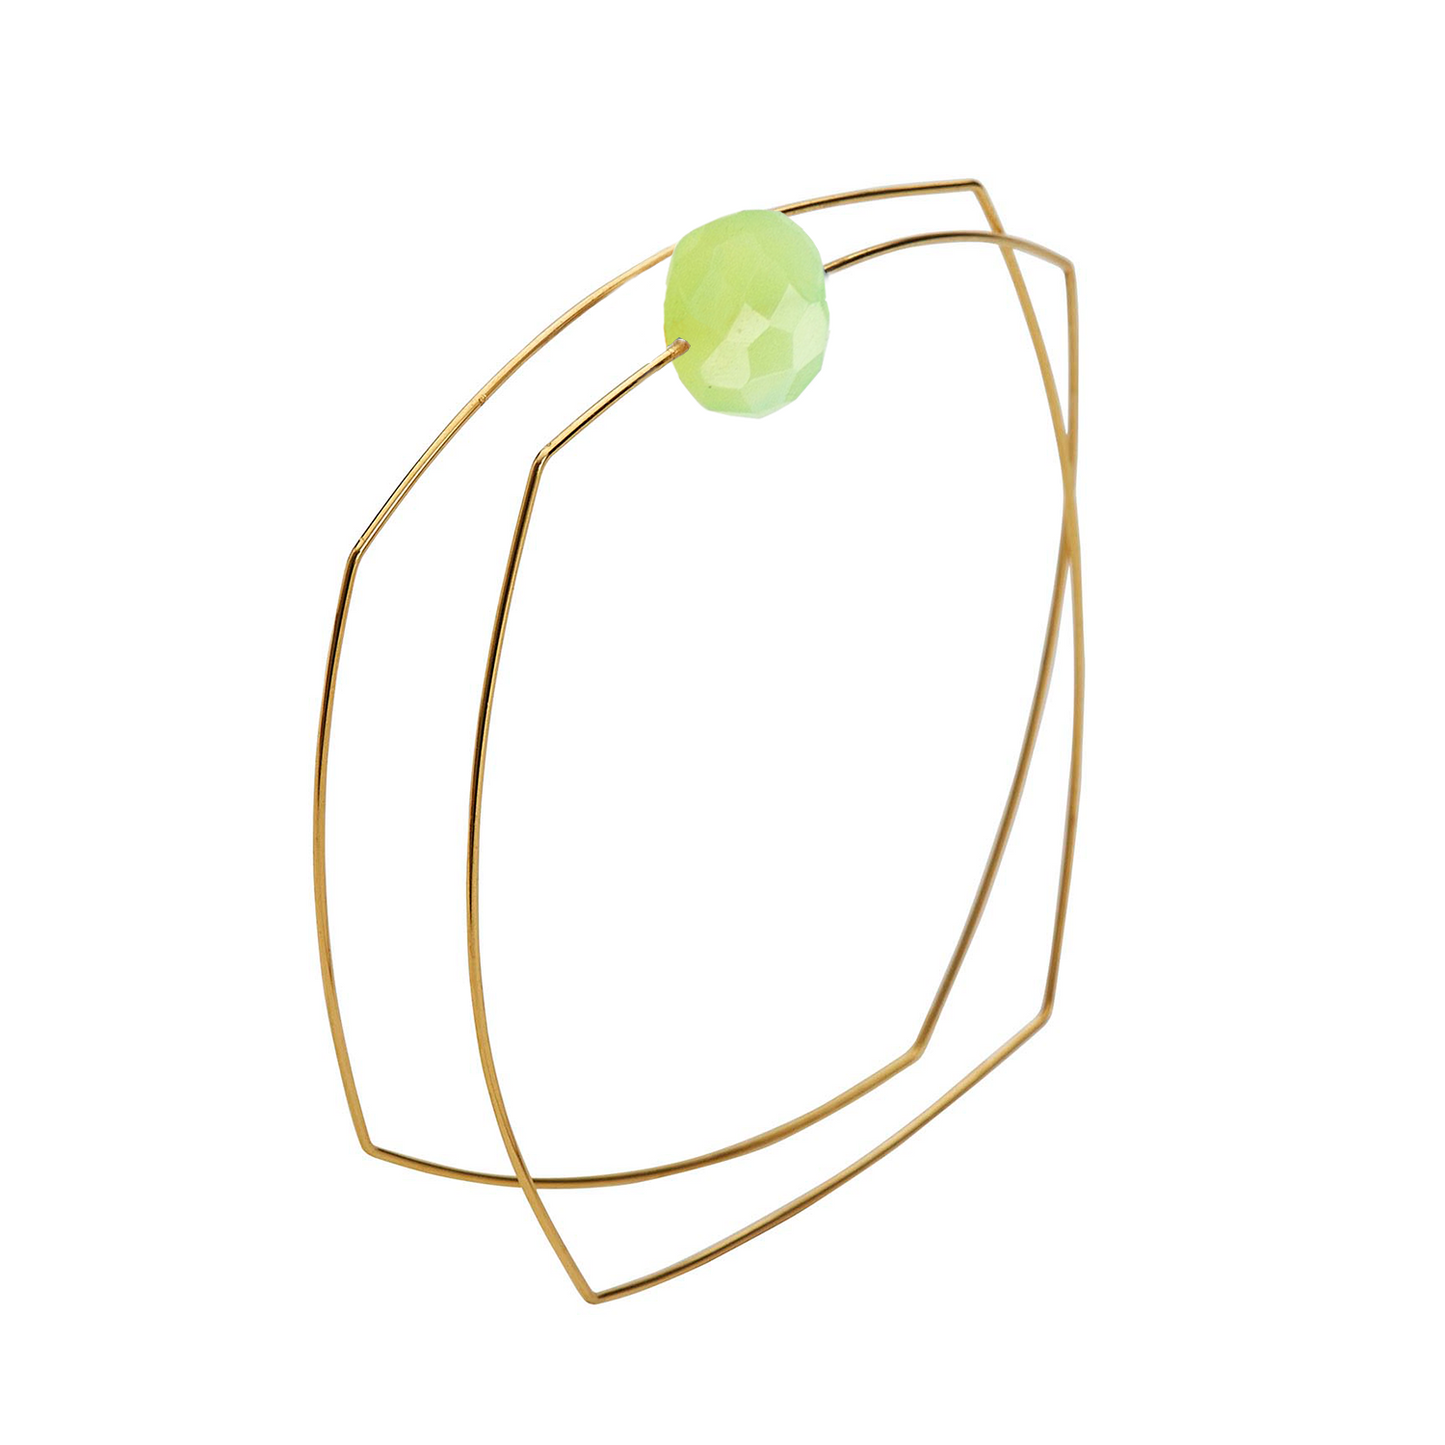 Square Wrap Bangle with hand-cut Gemstones